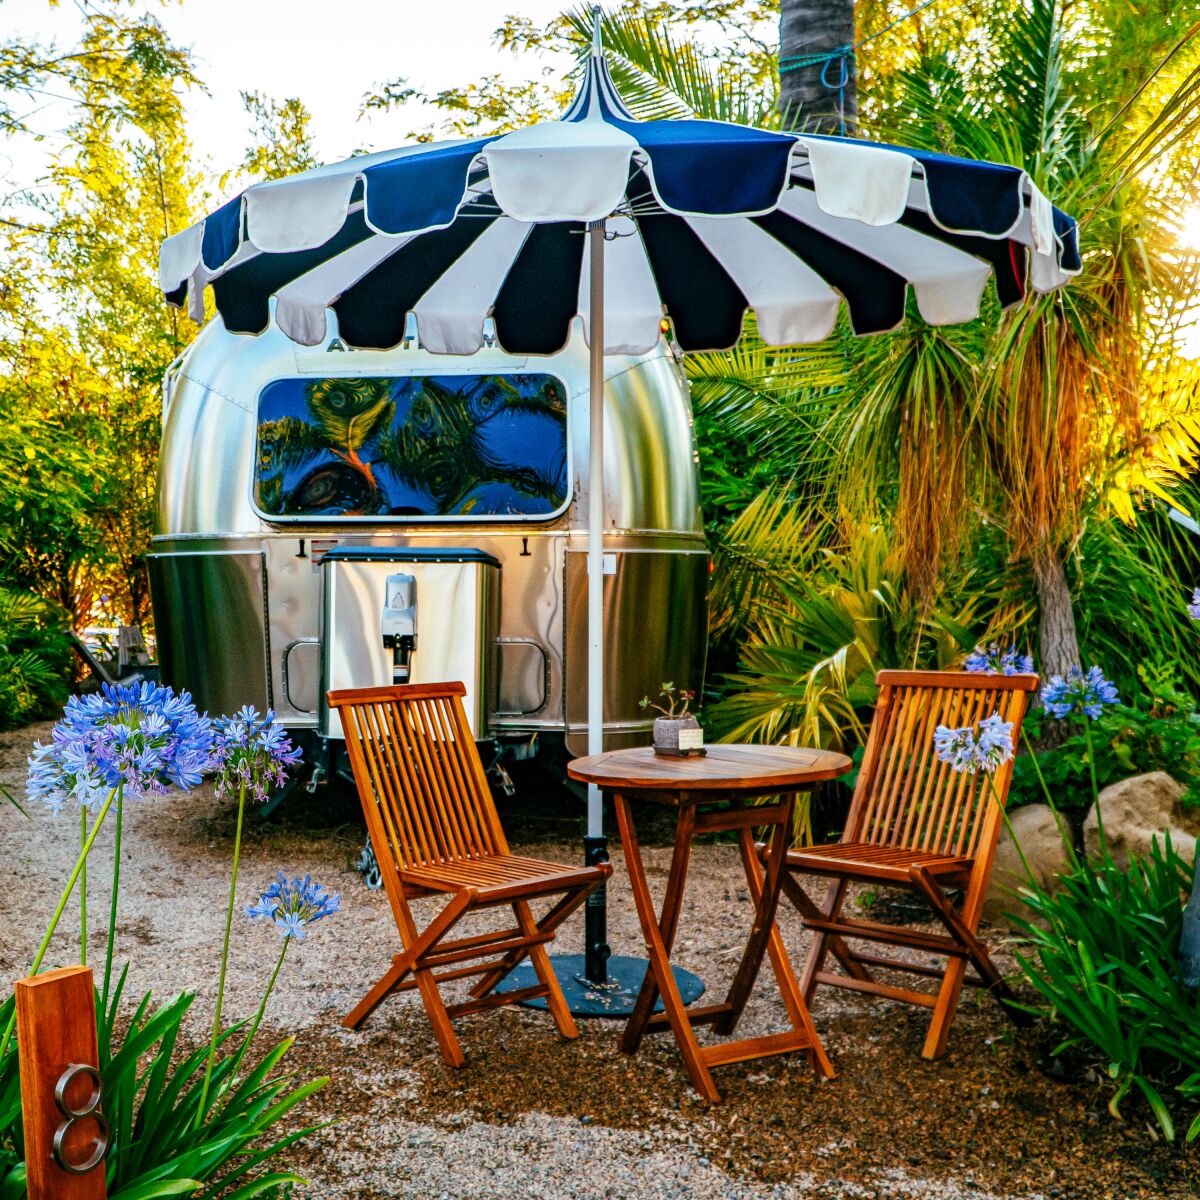 An Airstream trailer with chairs, a table and an umbrella.